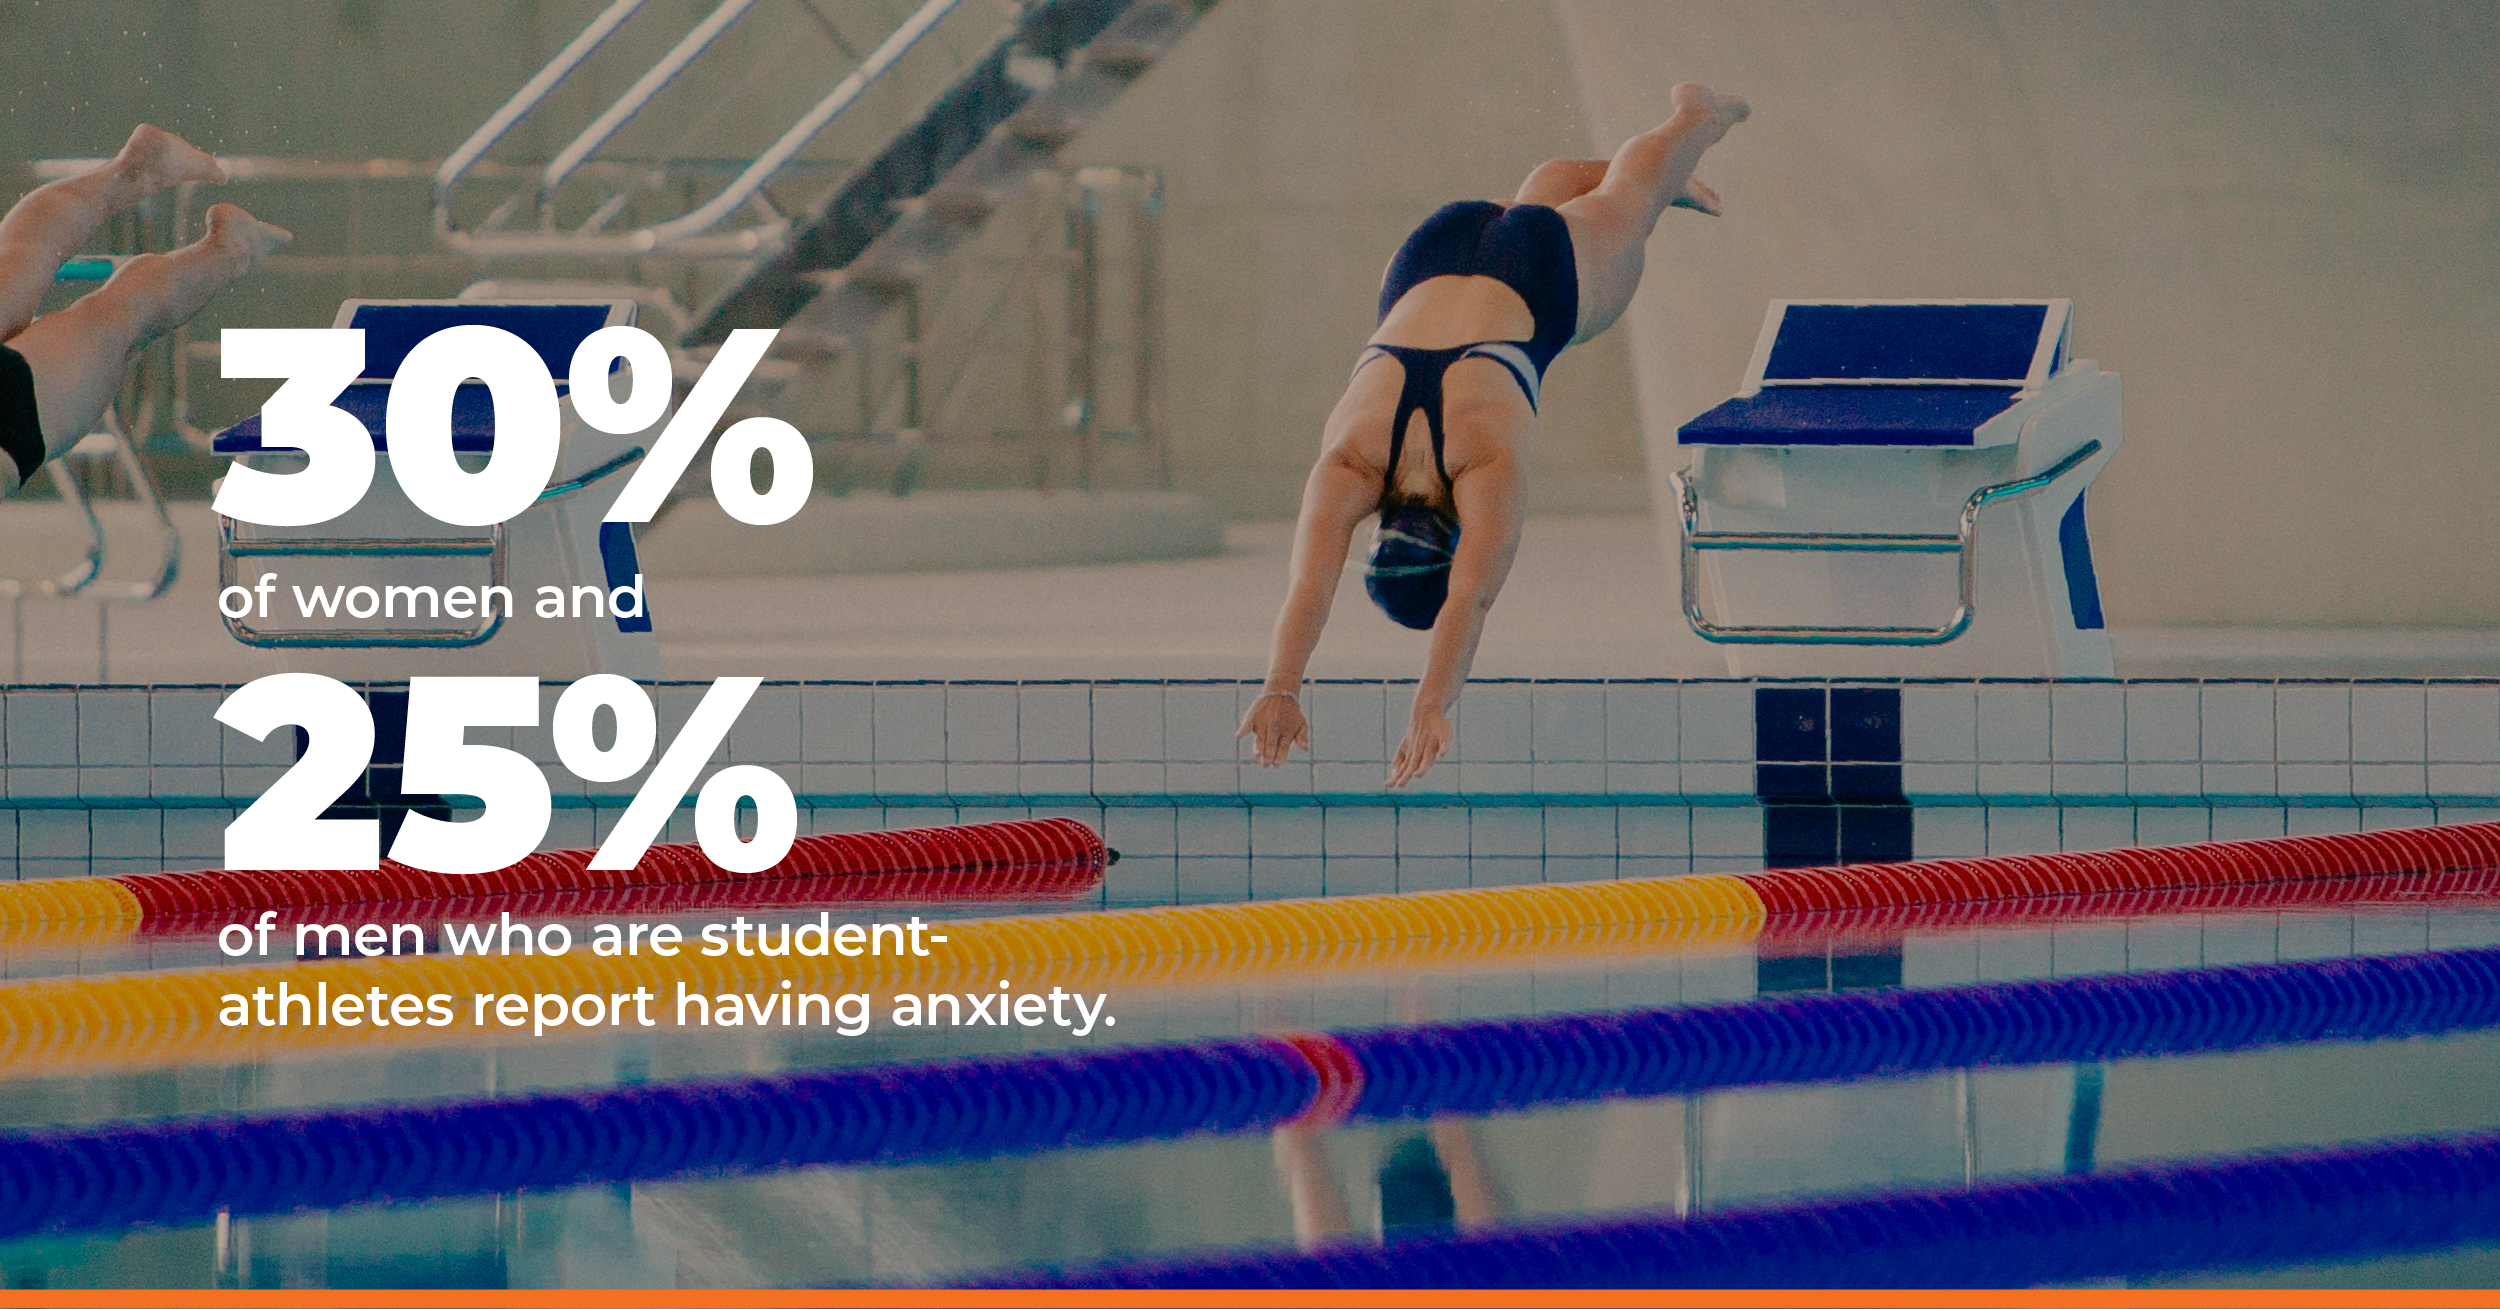 30% of women and 25% of men who are student athletes report having anxiety. Source: https://www.acsm.org/news-detail/2021/08/09/the-american-college-of-sports-medicine-statement-on-mental-health-challenges-for-athletes